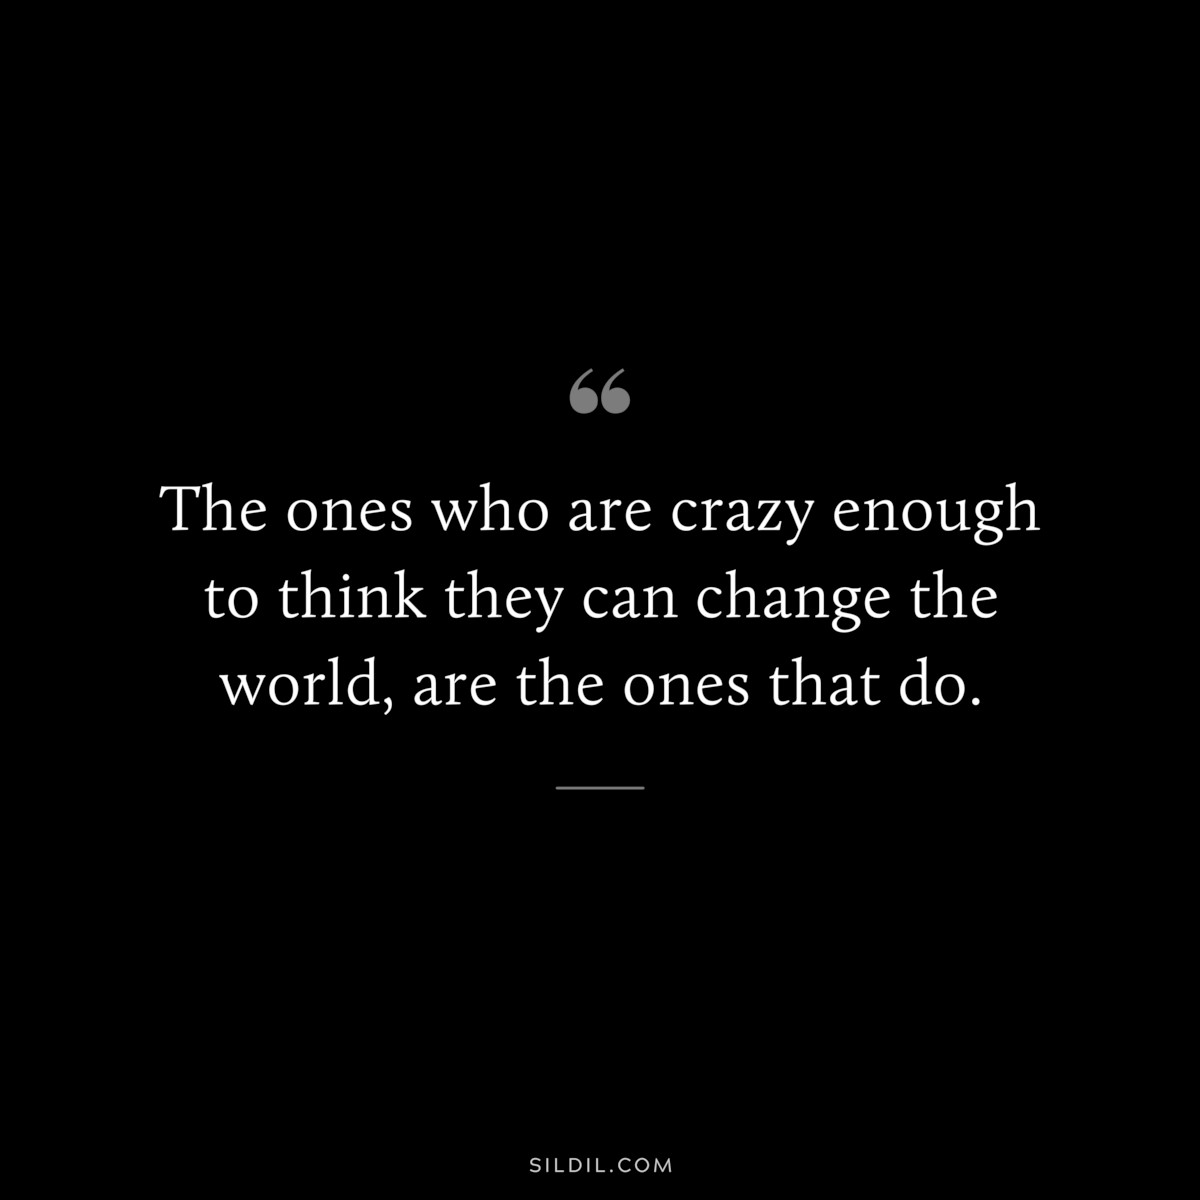 The ones who are crazy enough to think they can change the world, are the ones that do.